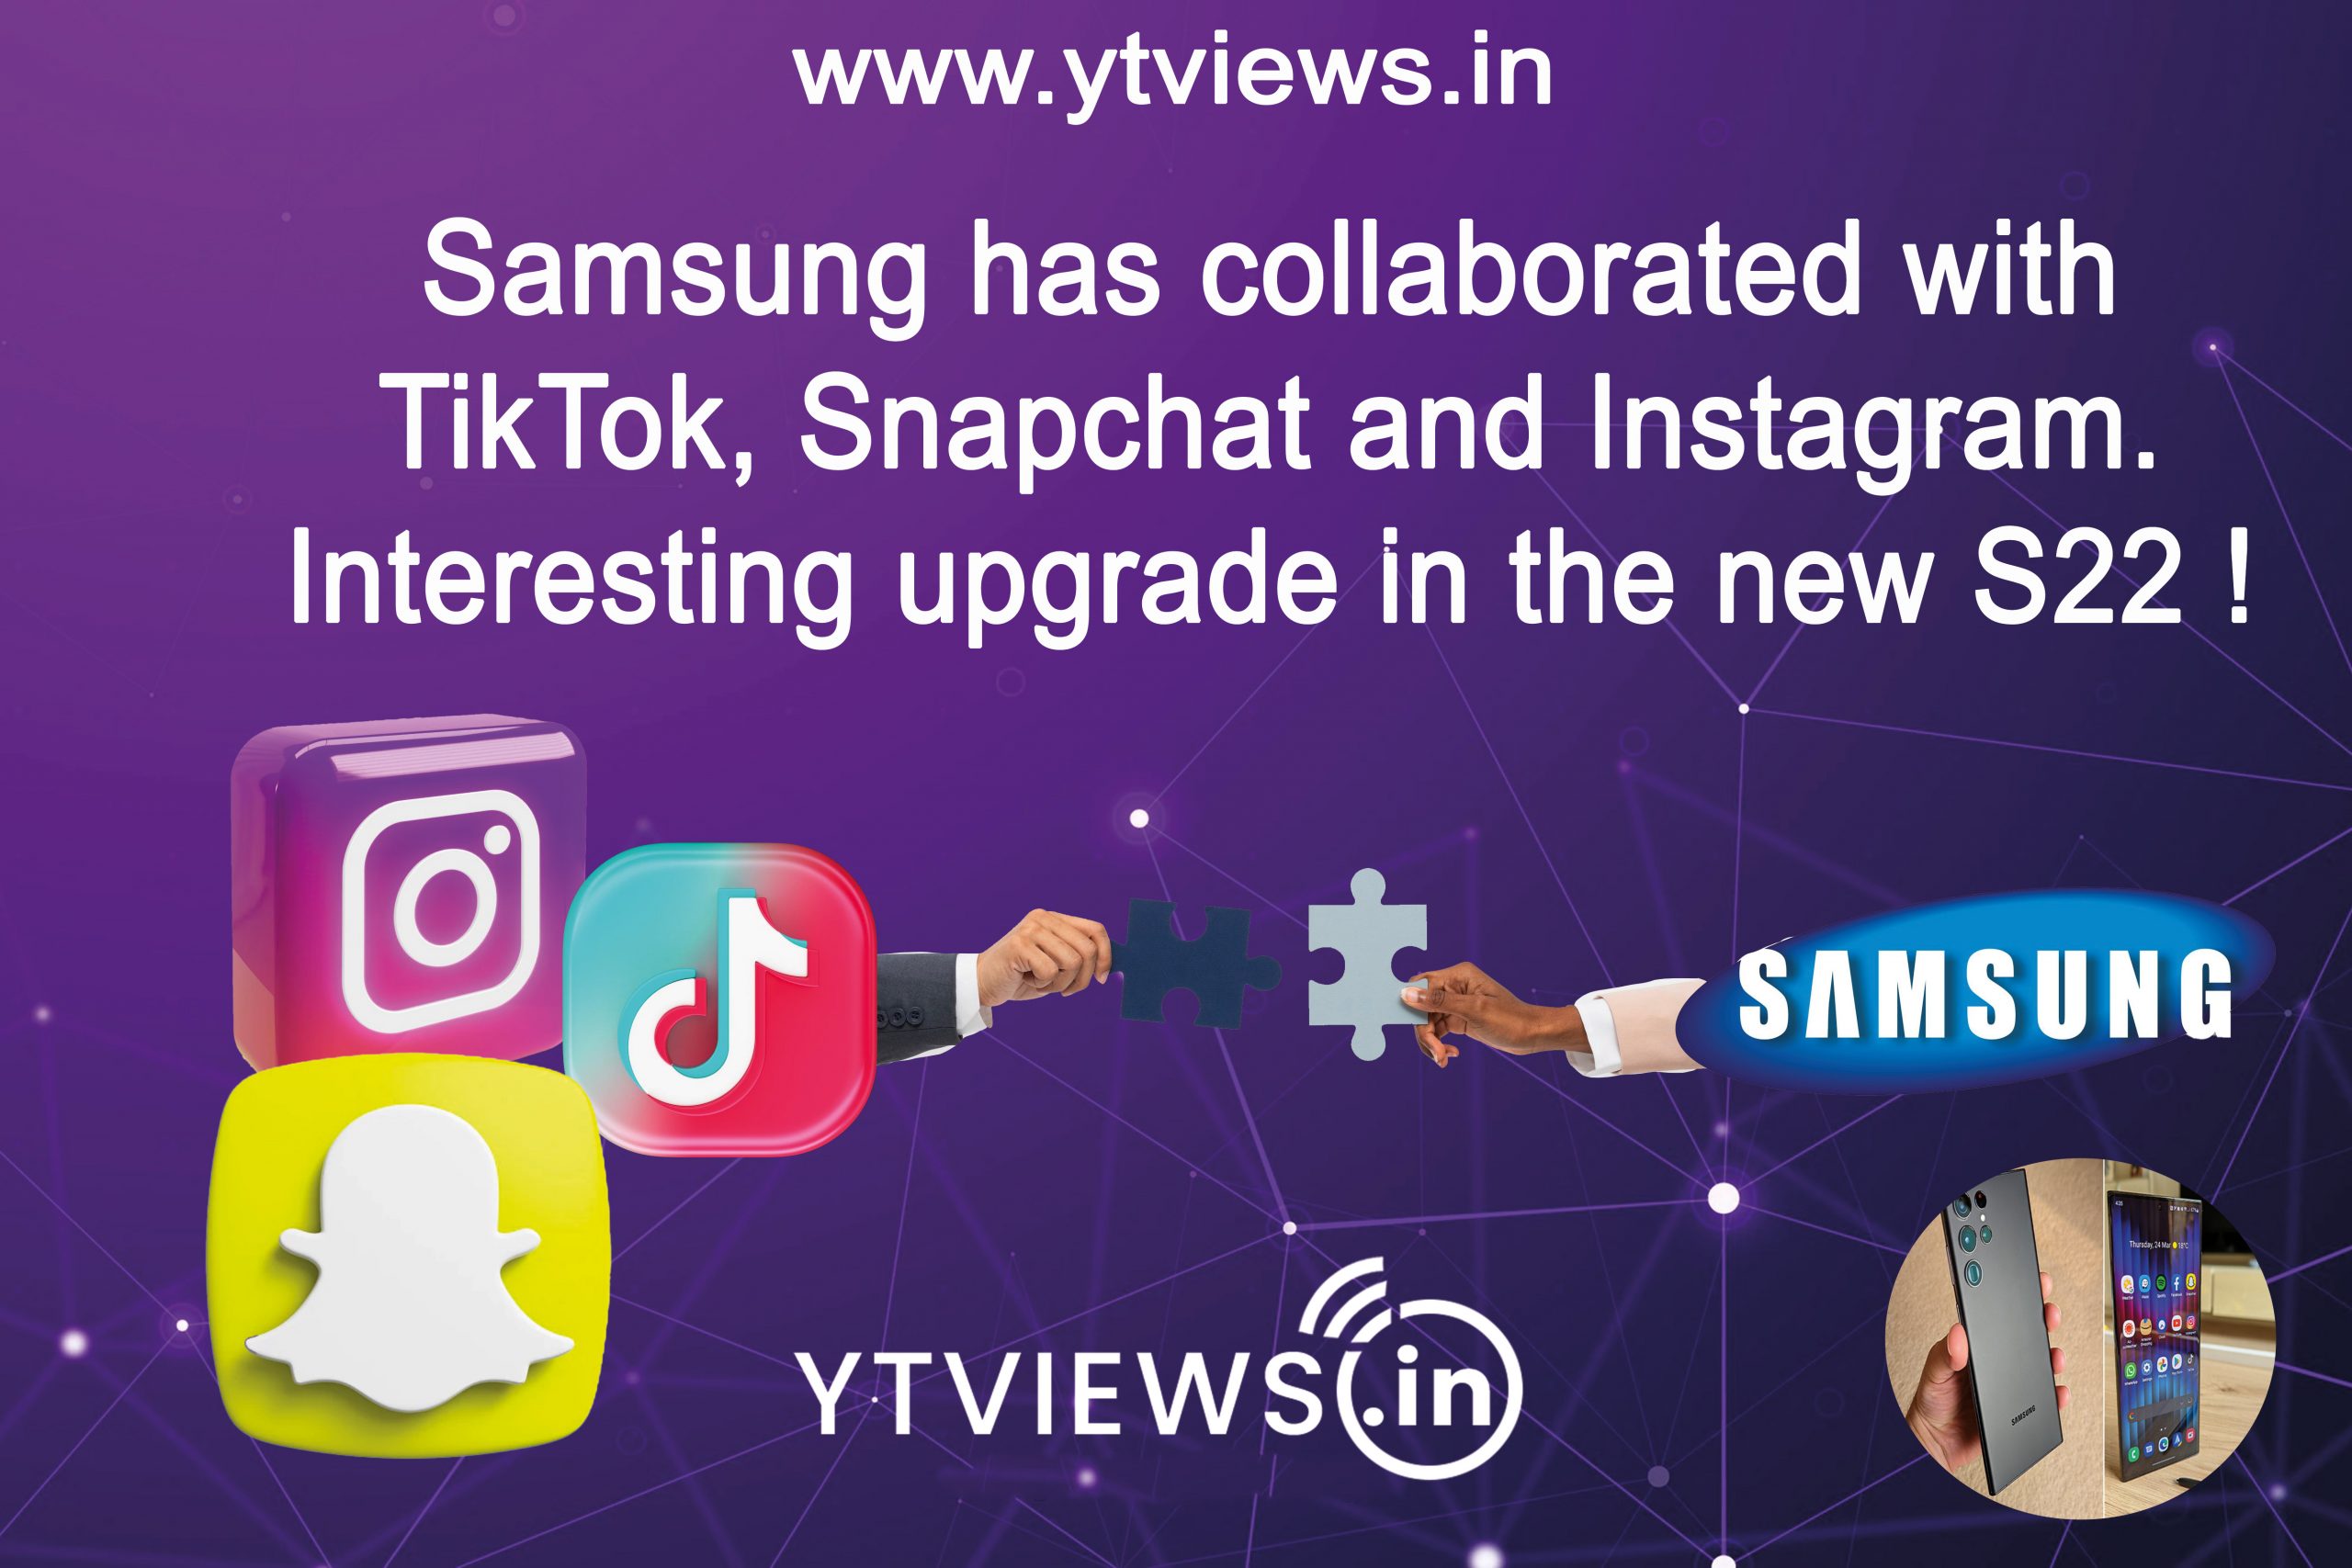 Samsung has collaborated with TikTok, Snapchat and Instagram. Interesting upgrade in the new S22